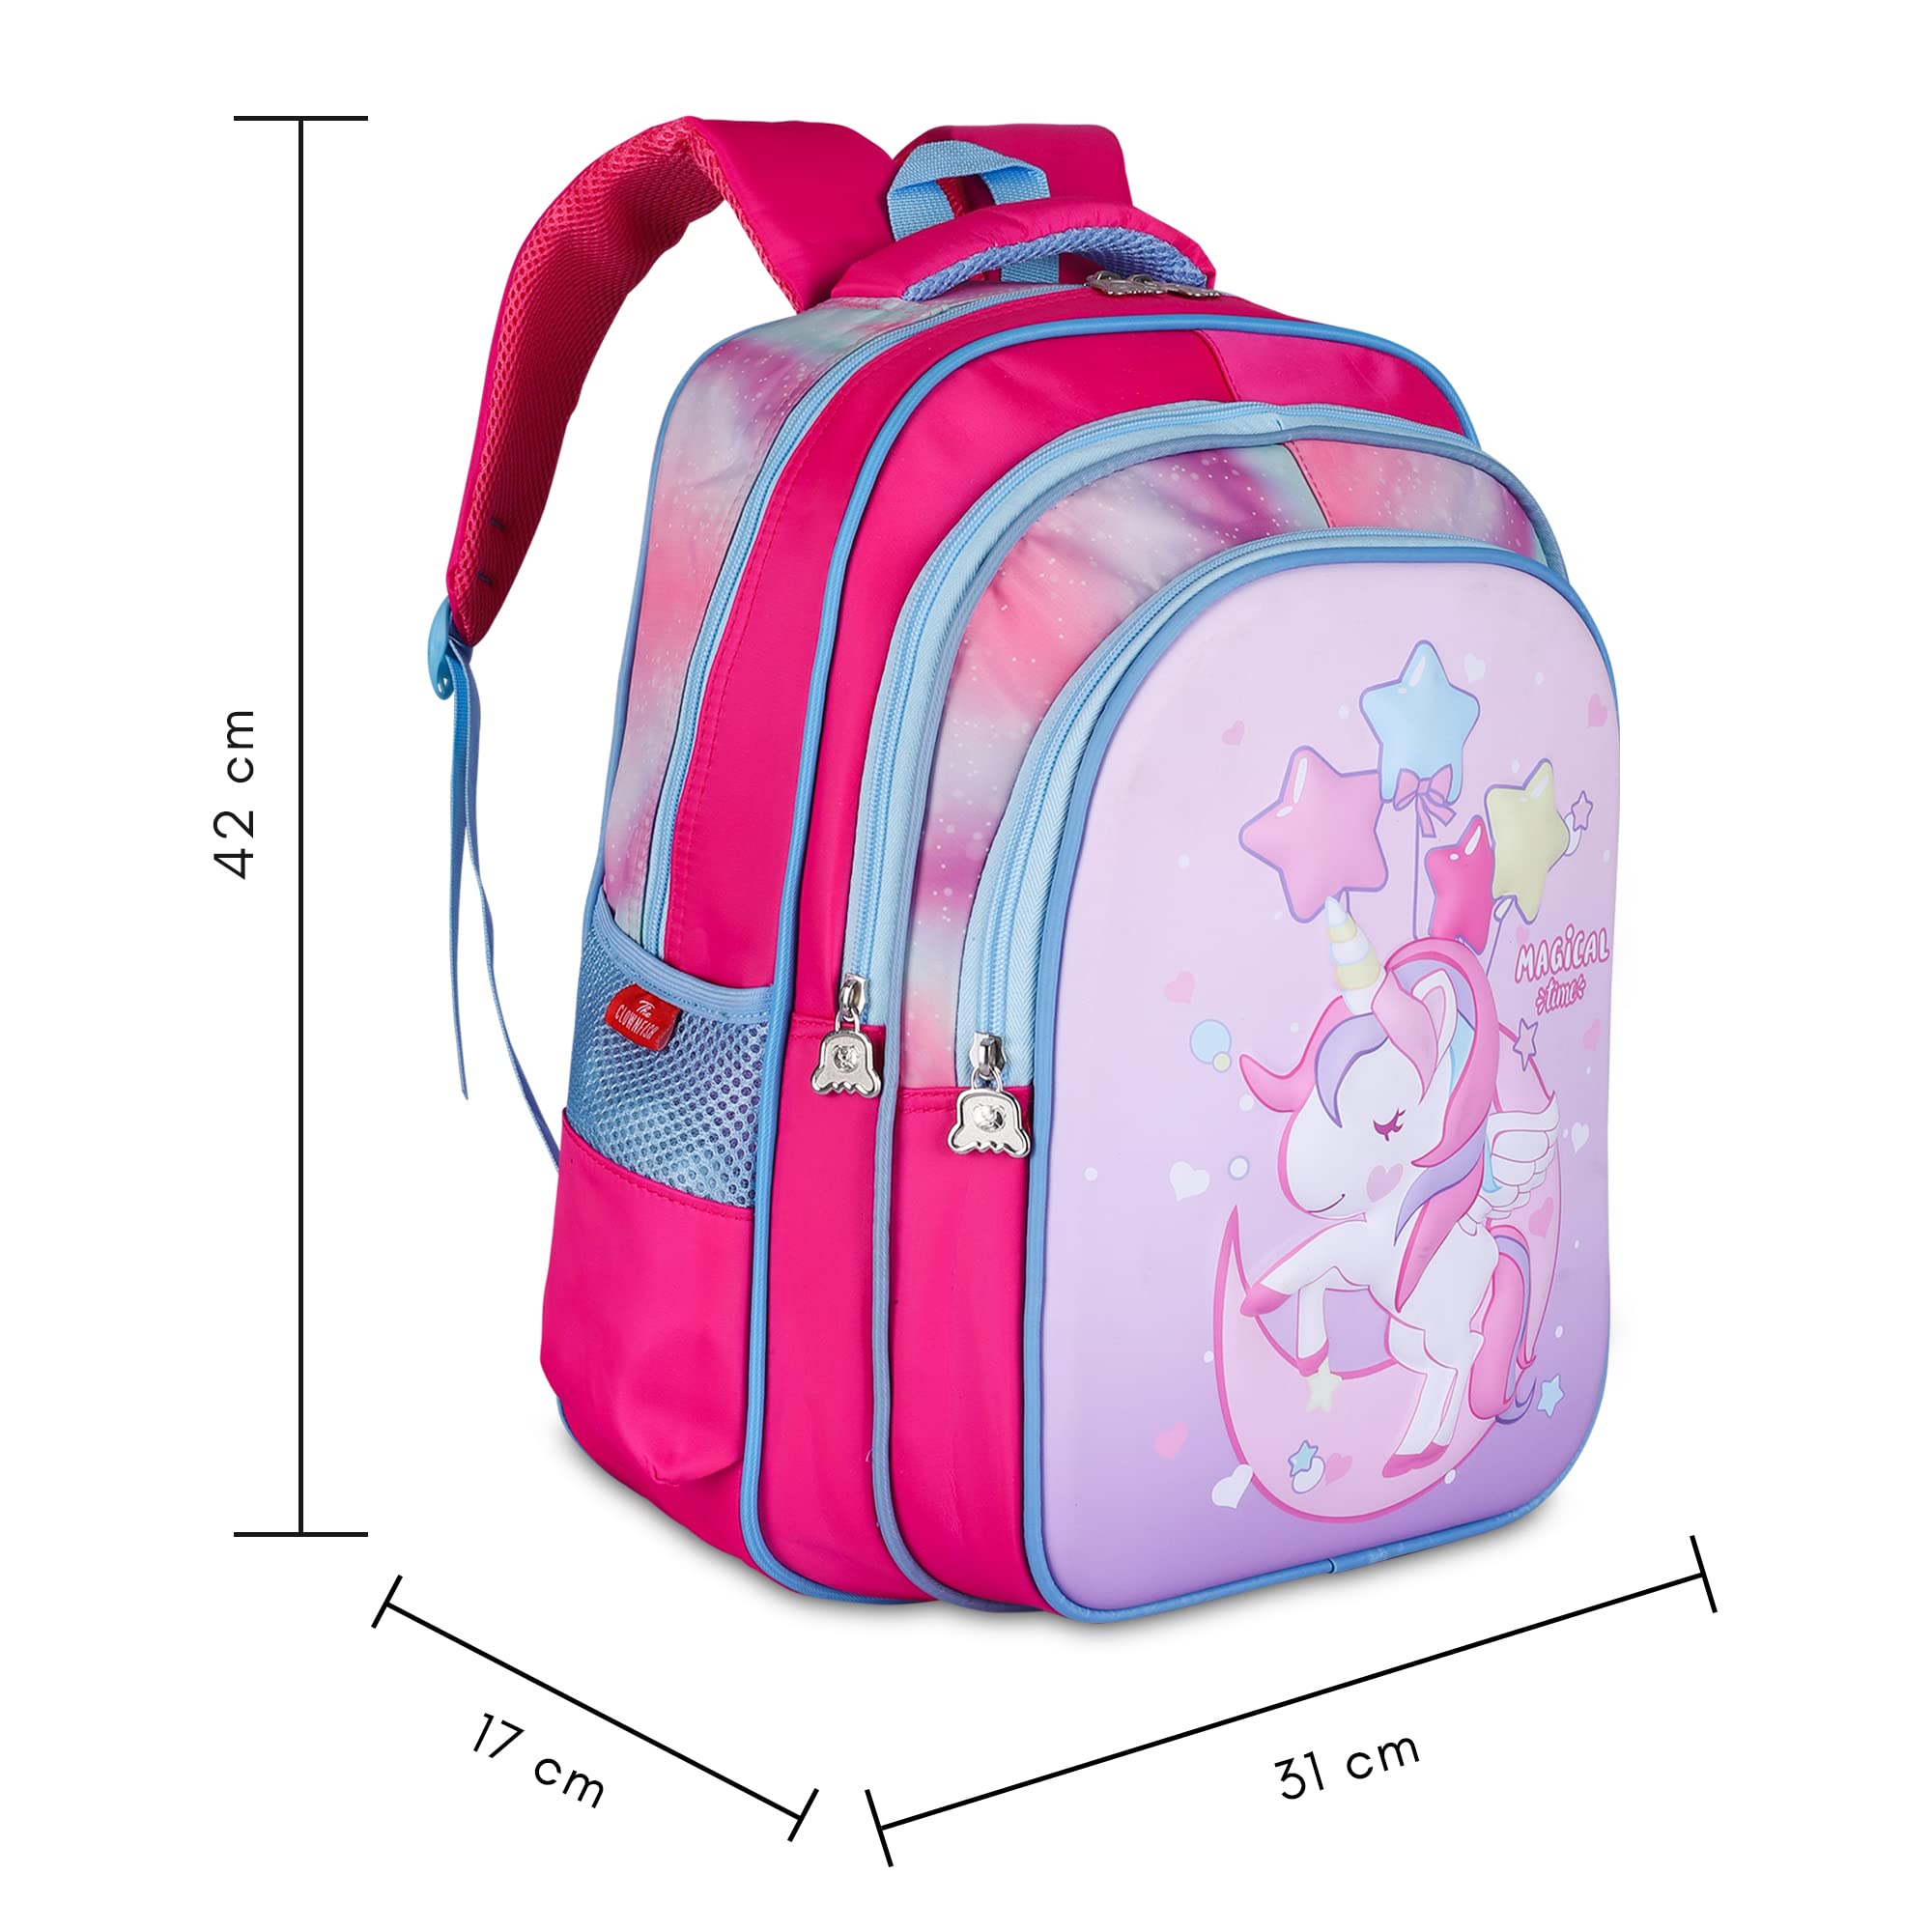 THE CLOWNFISH KidVenture Series Polyester 22 Litres Kids Backpack School Bag Daypack Sack Picnic Bag for Tiny Tots Child Age 5-7 years (Blush Pink)